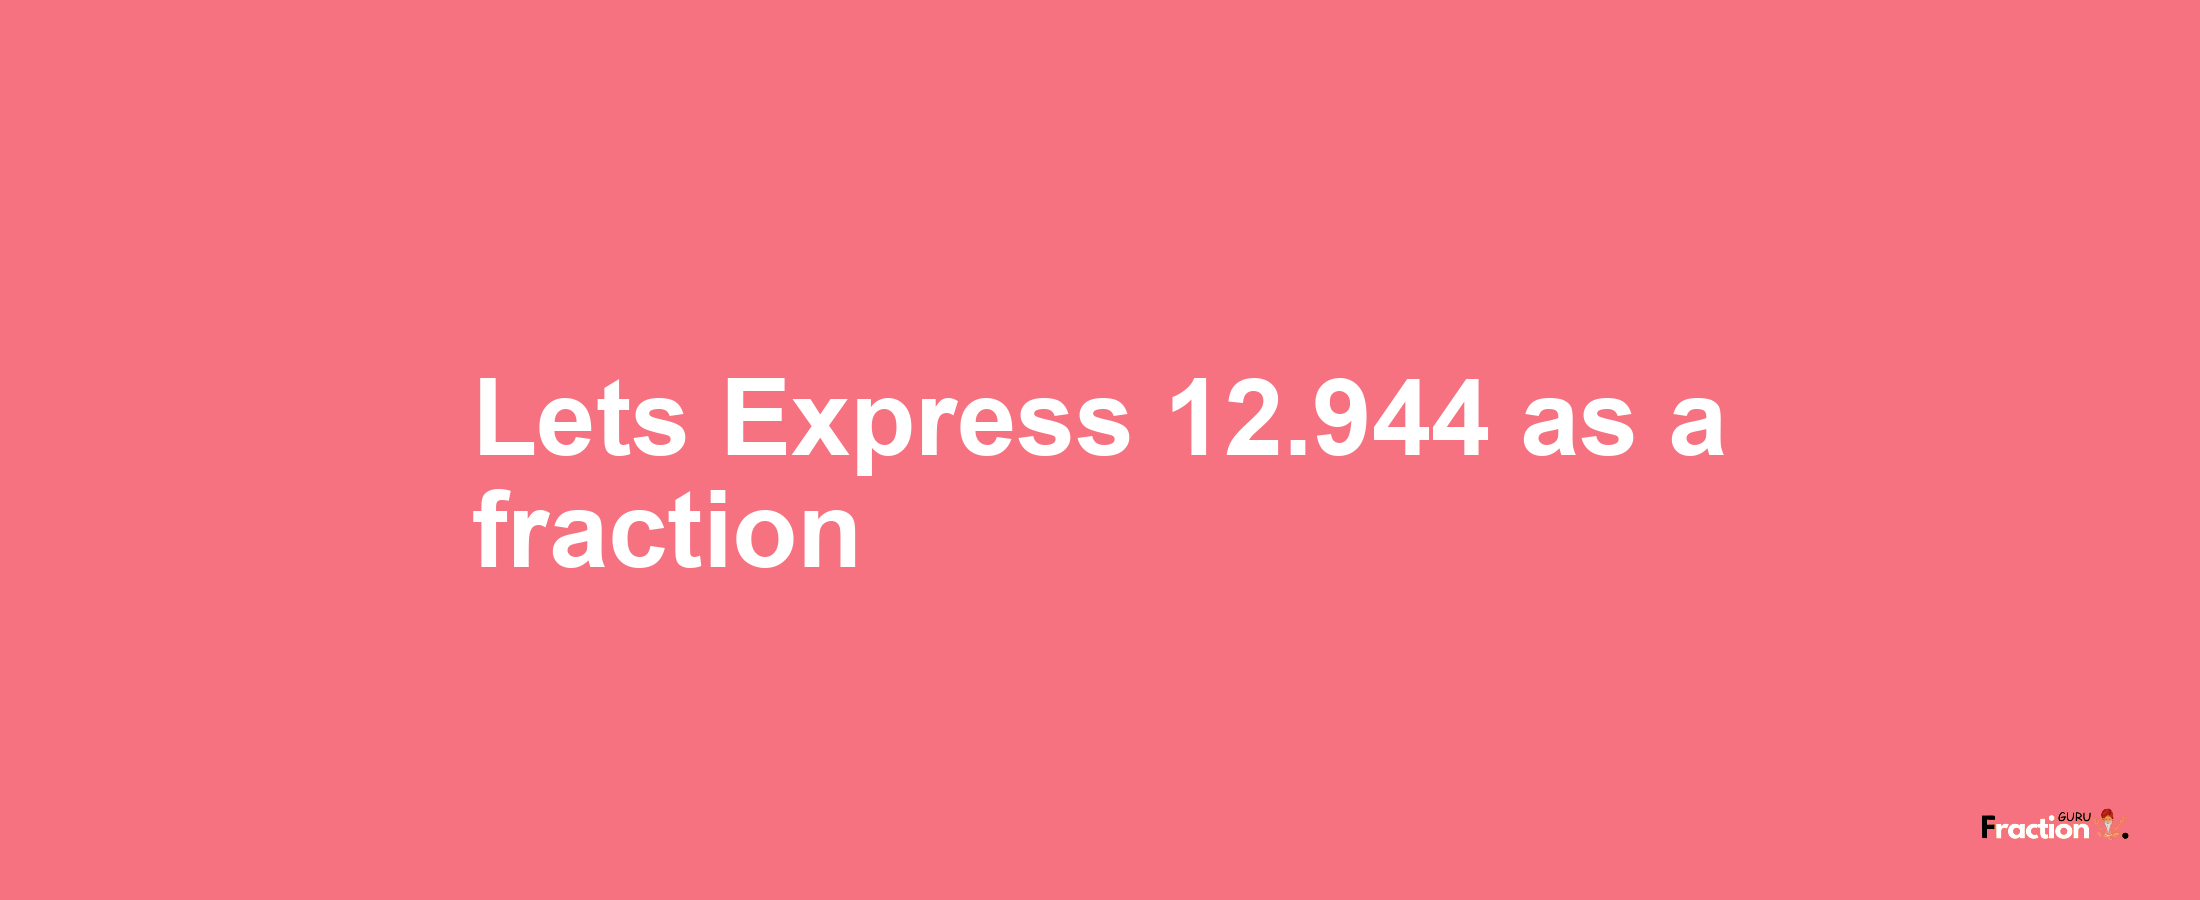 Lets Express 12.944 as afraction